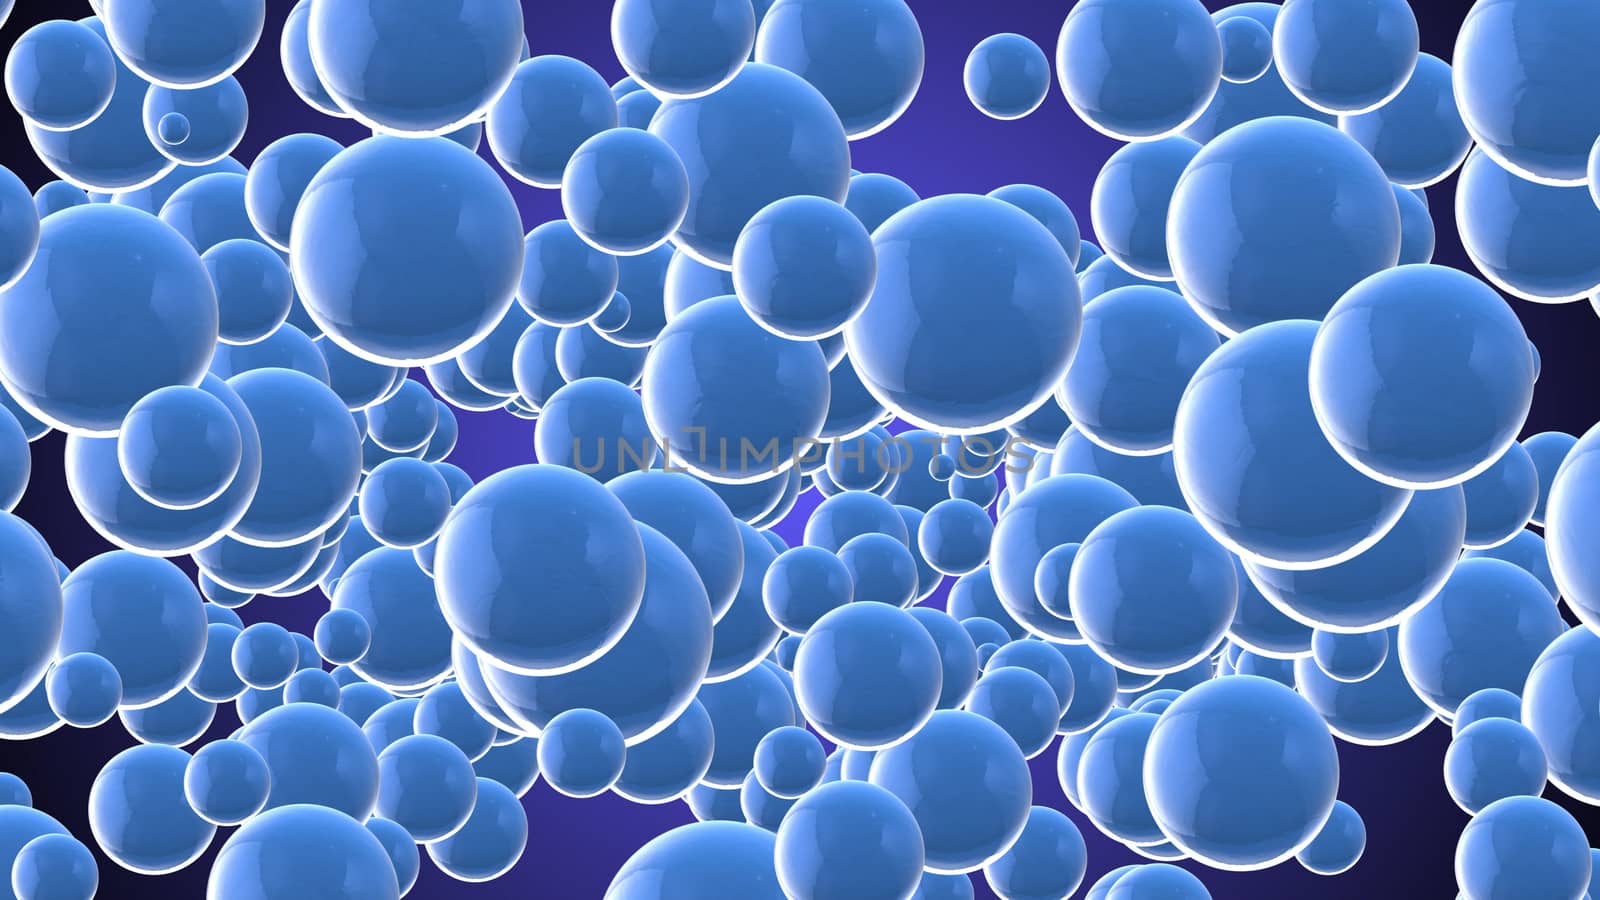 An optimistic 3d rendering of light blue stars and balls with numerous sparkling tints and slightly seen reflections flying in the light violet background. They create a funny mood.